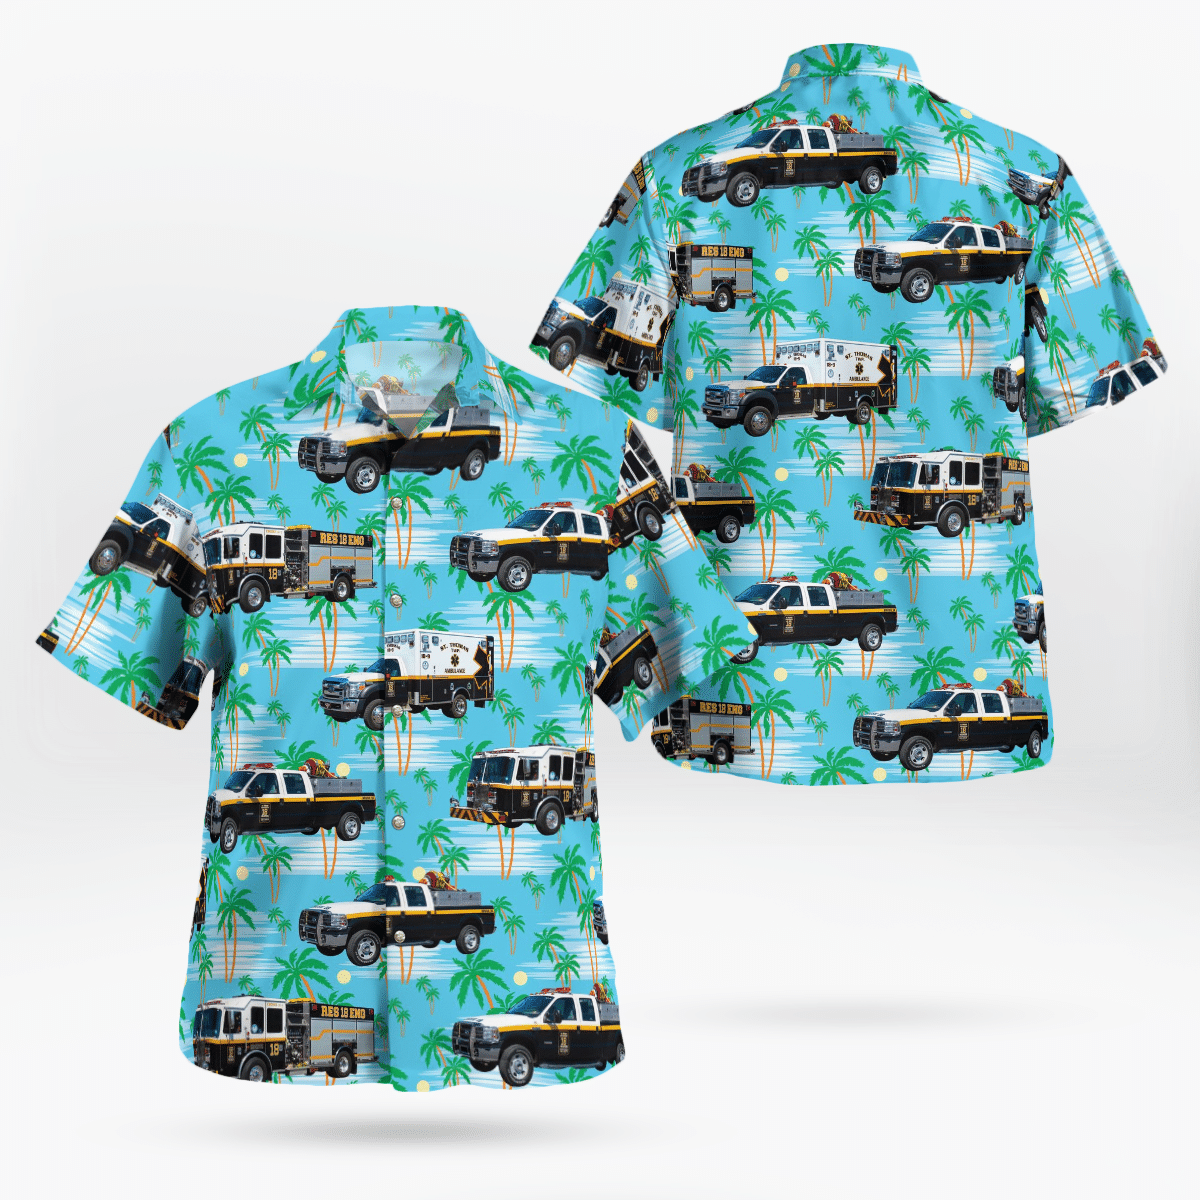 Top Hawaiian shirts are perfect for hot and humid days 195